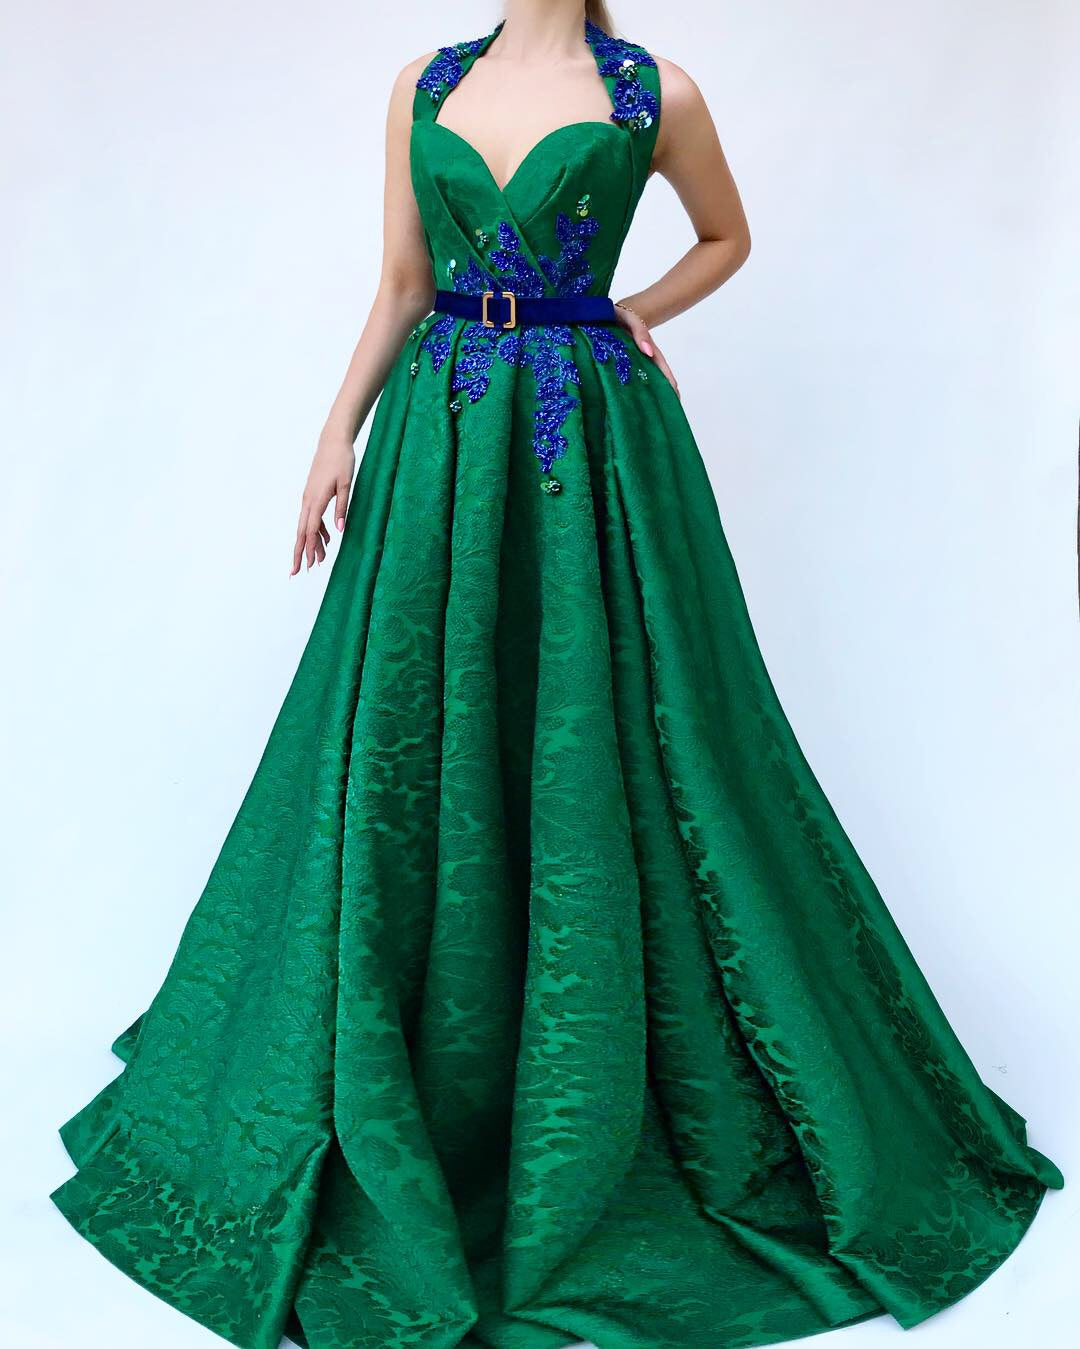 Green A-Line dress with belt, embroidery and straps